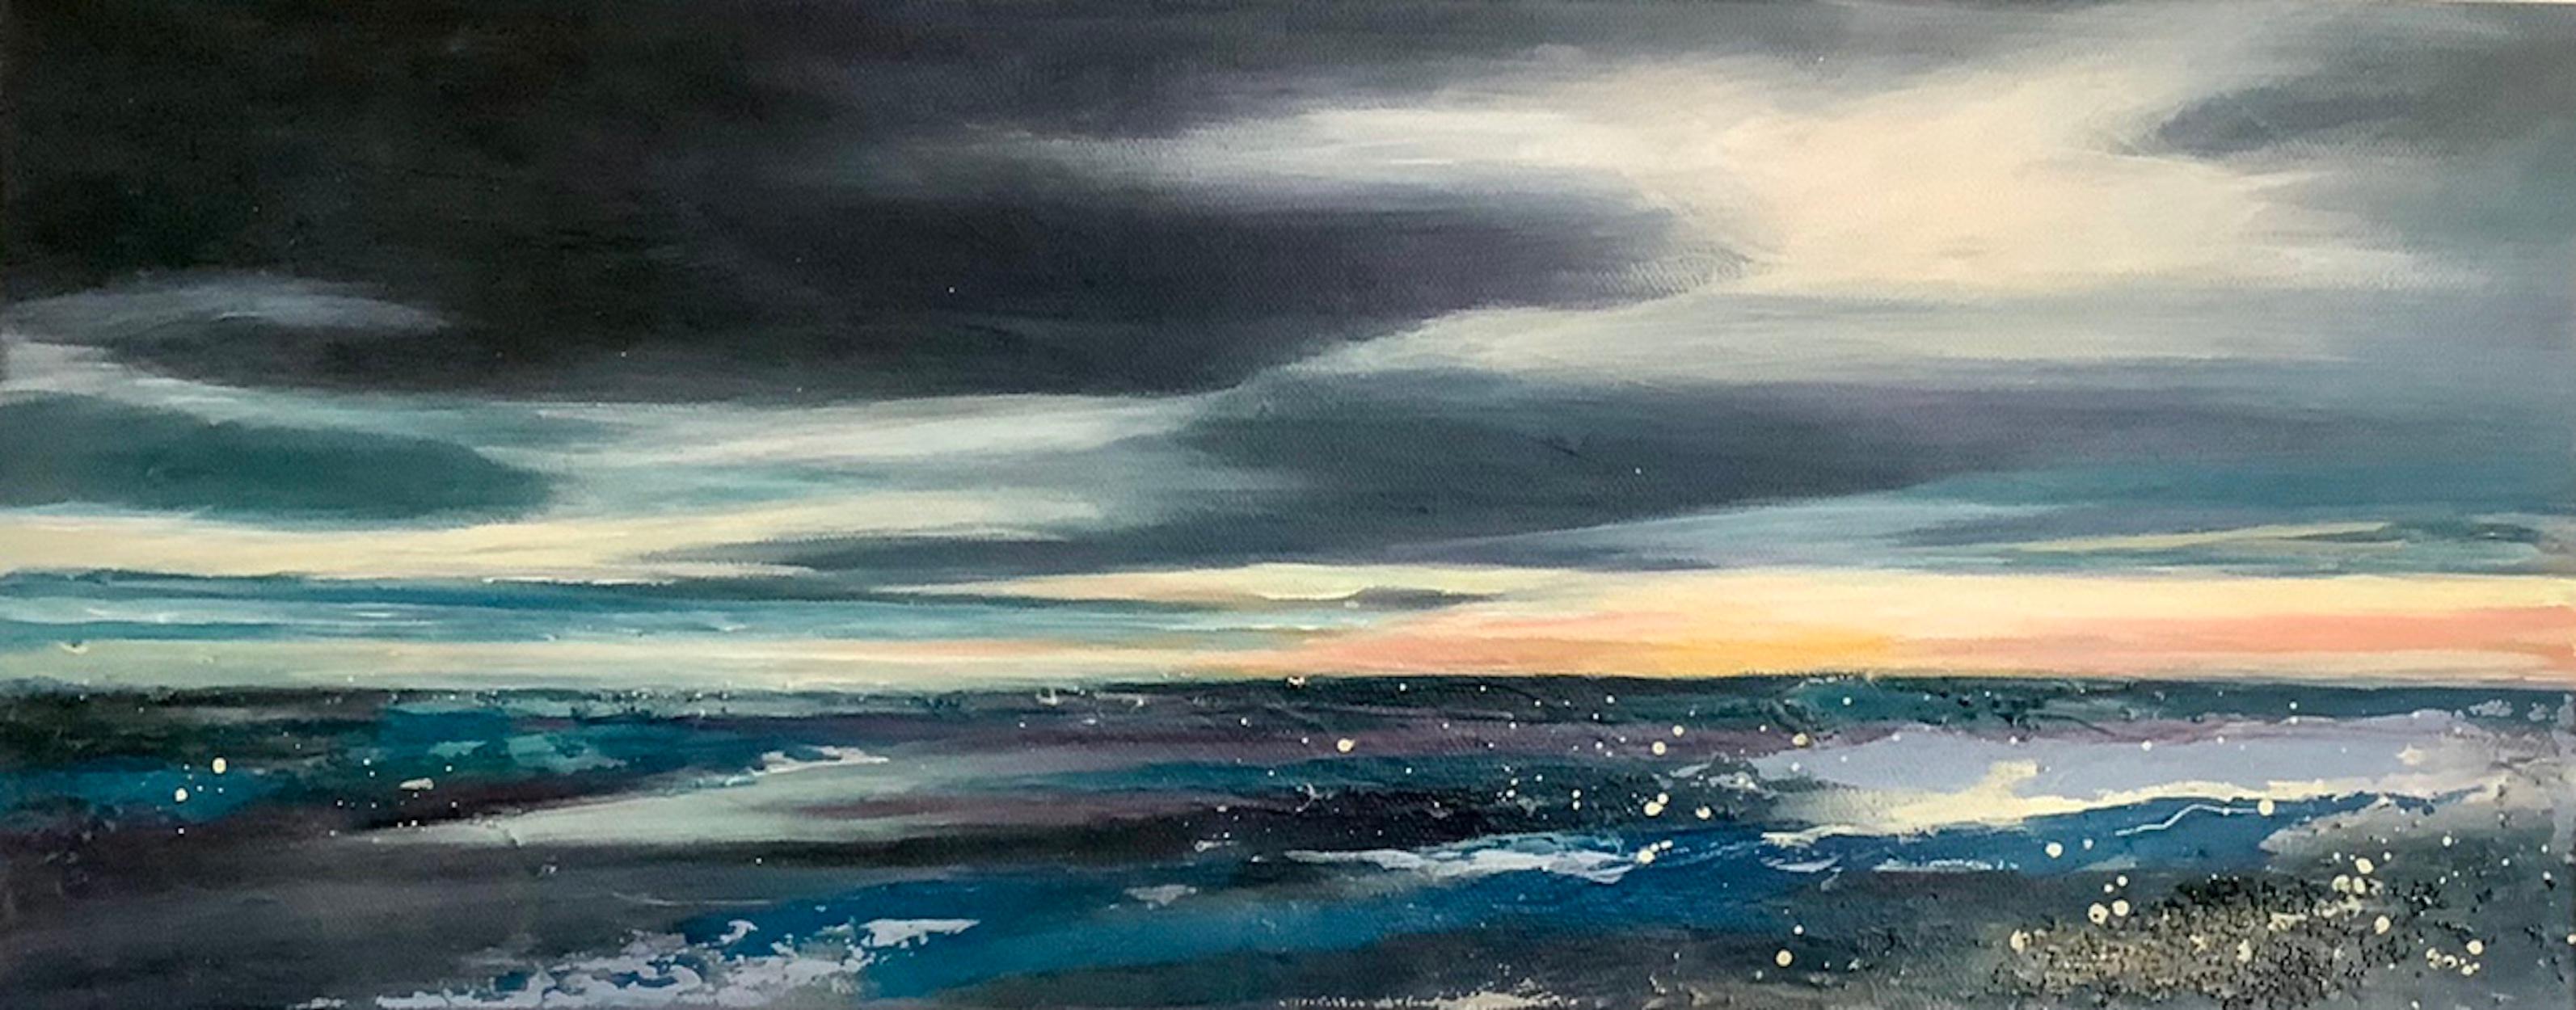 Adele Riley  Abstract Painting - The Last Light by Adele Riley, Original seascape painting, Contemporary art